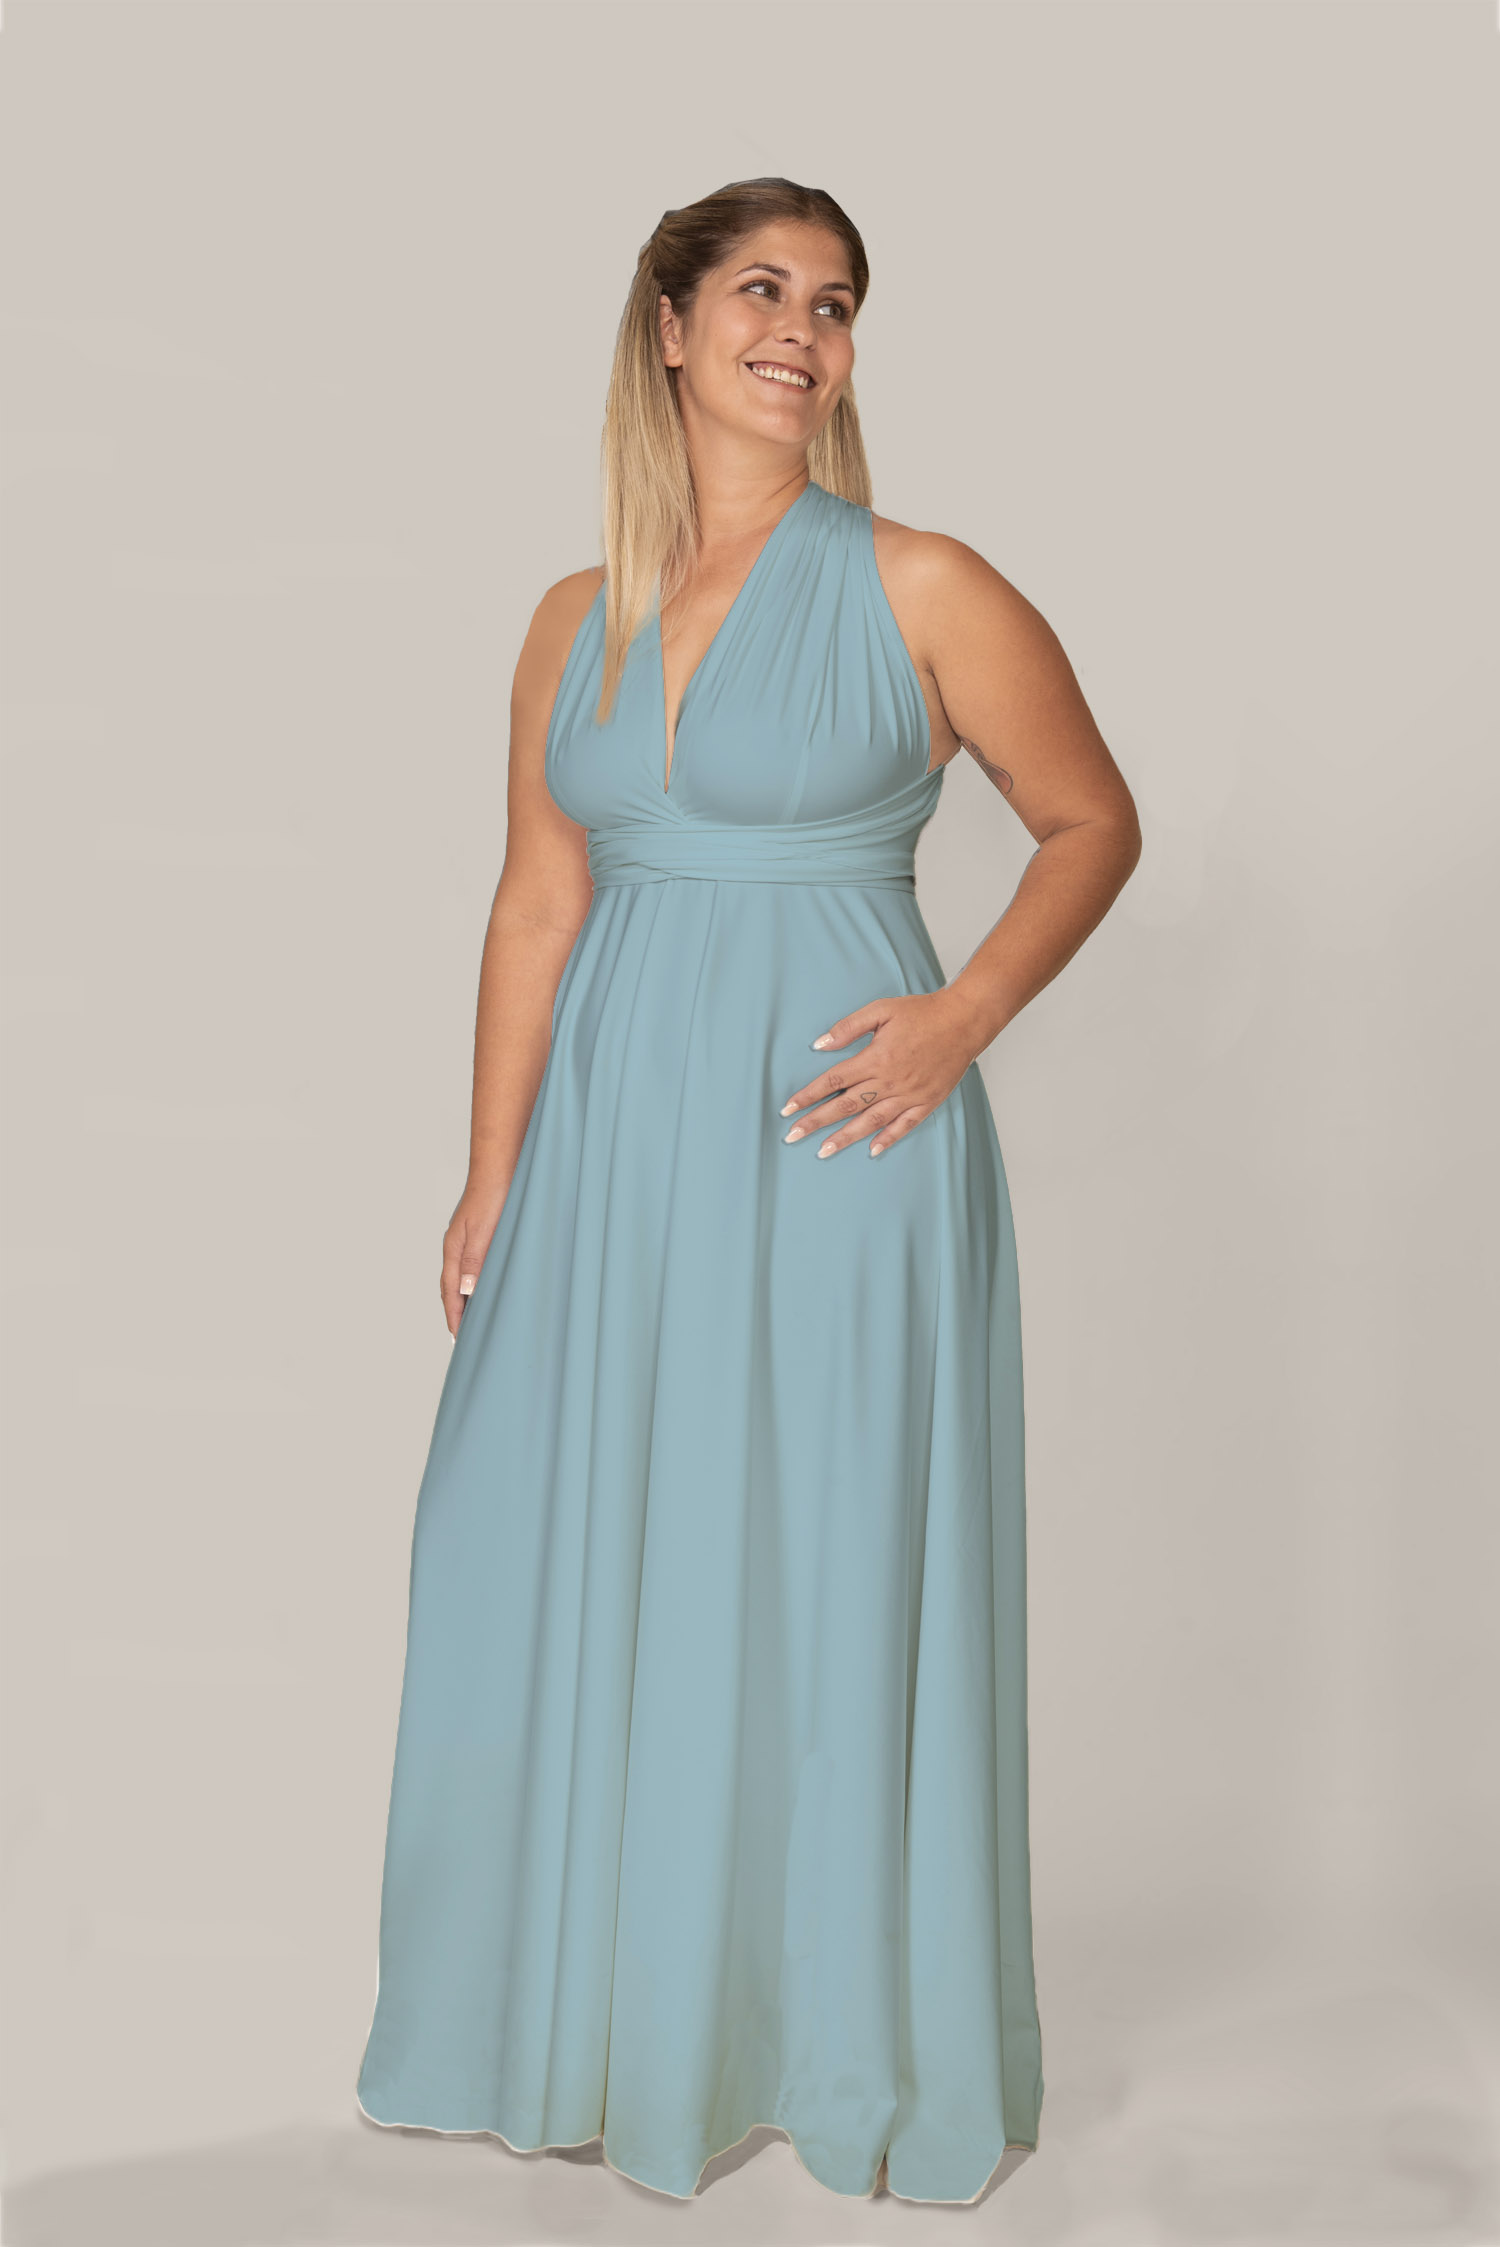 LONG CLASSIC CURVY IN TURQUOISE